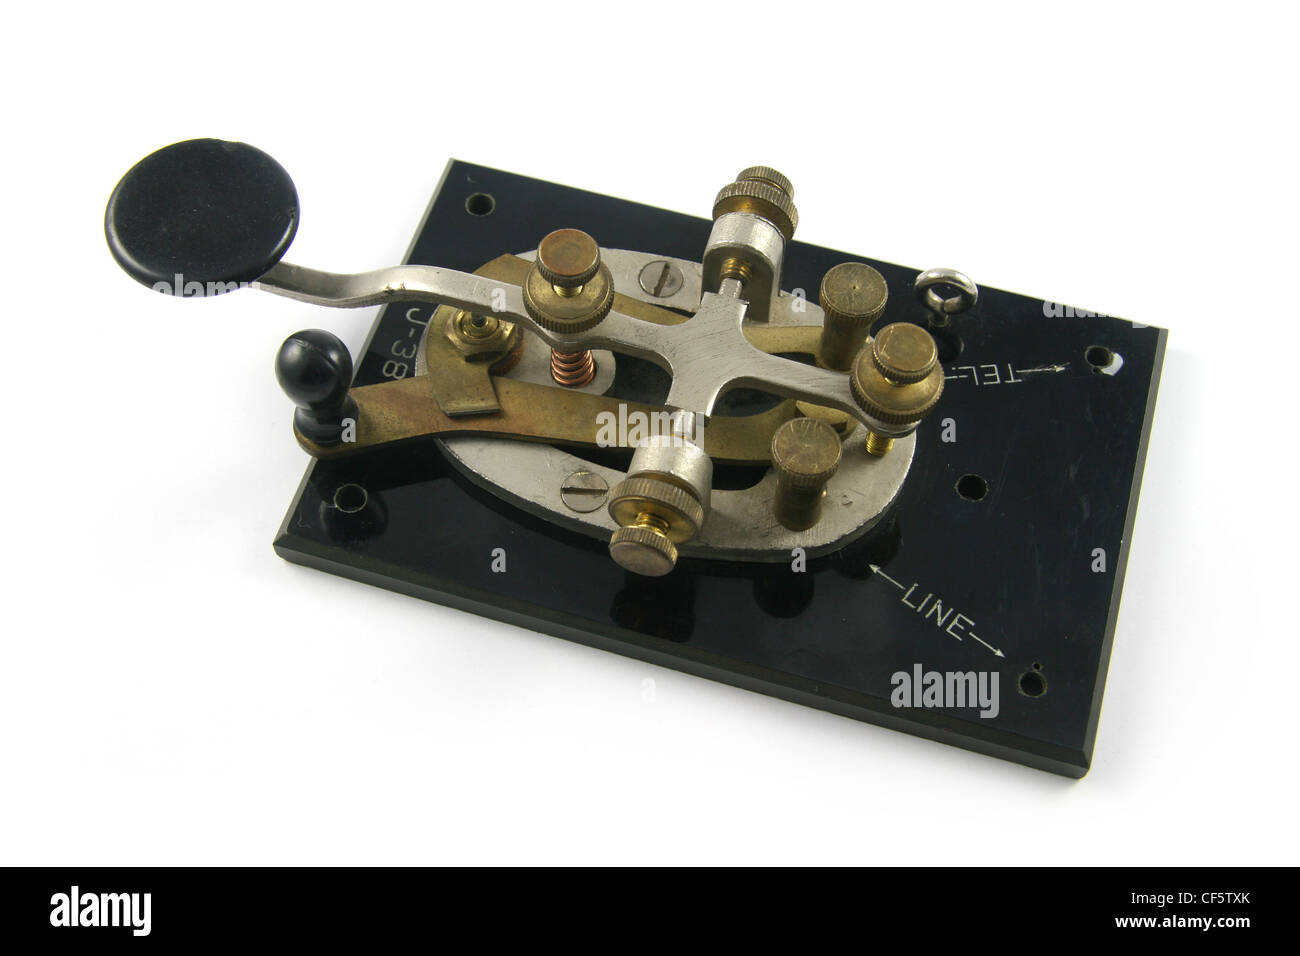 J-38 telegraph key, used by the US Army Signal Corps in the 1940s and 50s. Stock Photo